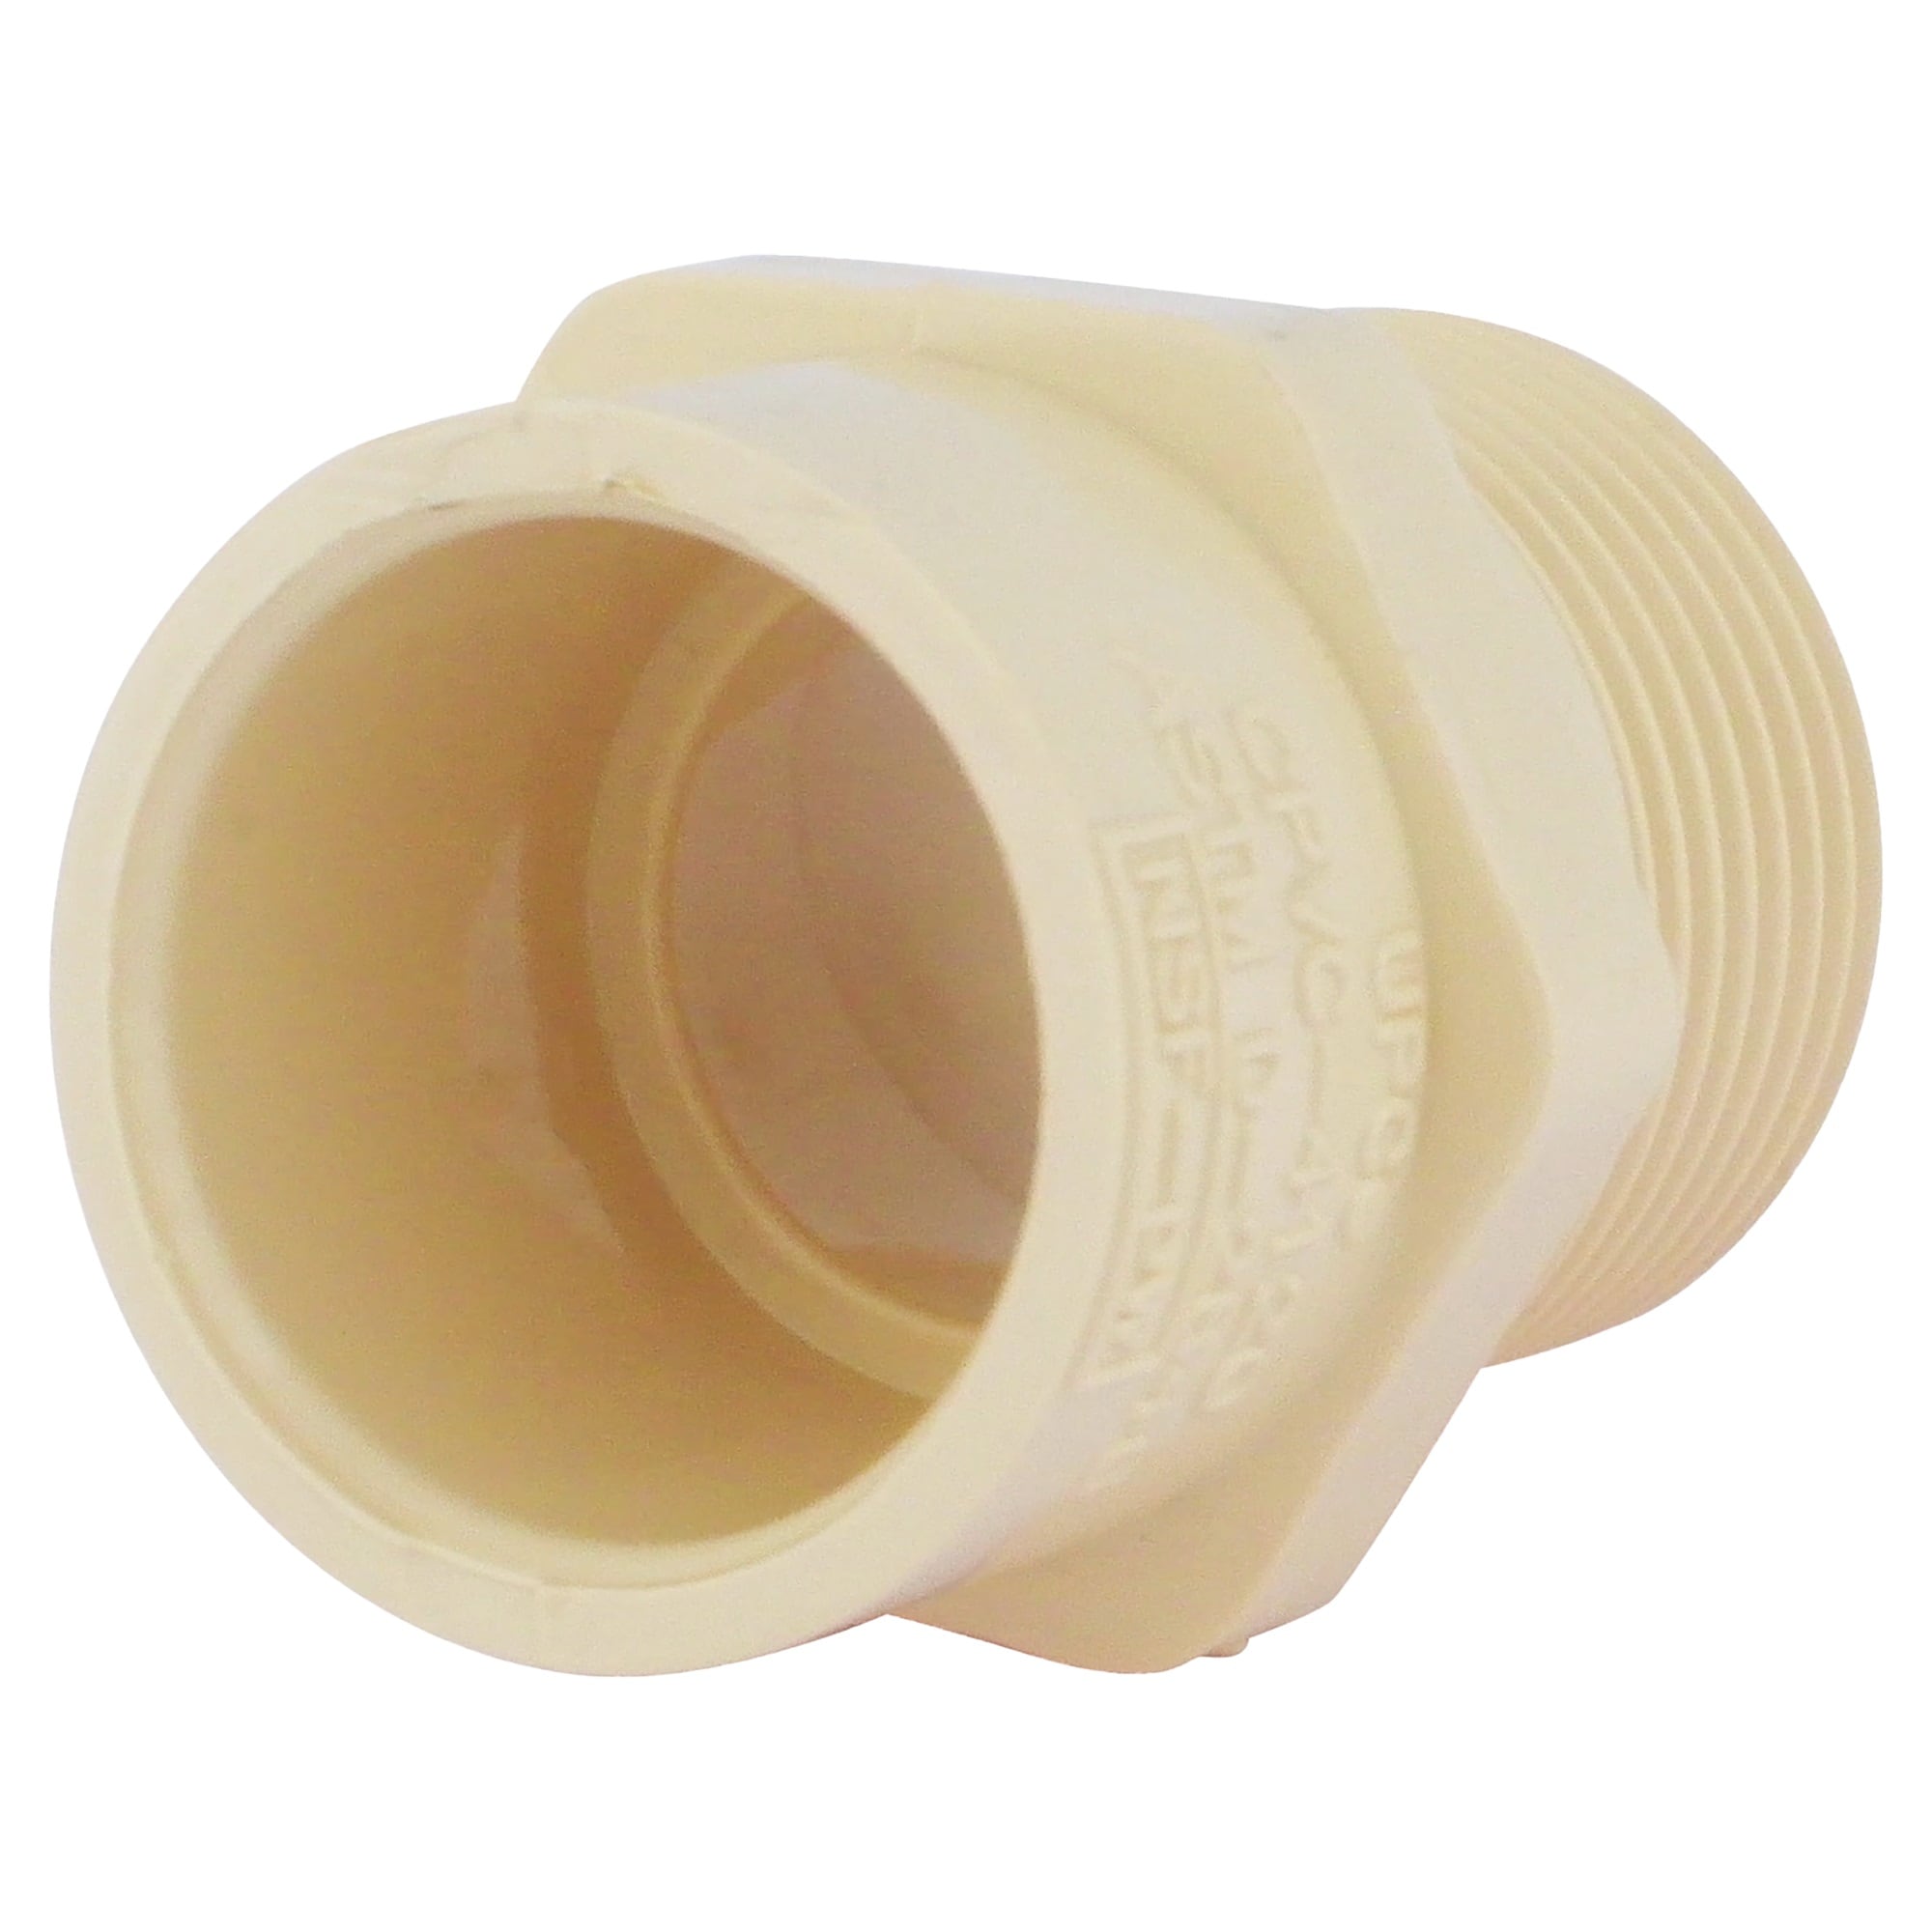 Charlotte Pipe 1/2-in CPVC Male Adapter for Cold Water Only - NSF Approved, ASTM D1784, ASTM D2846 - Potable Water Use - 400 PSI - 1/2-in Diameter -  CTS 02109  0600